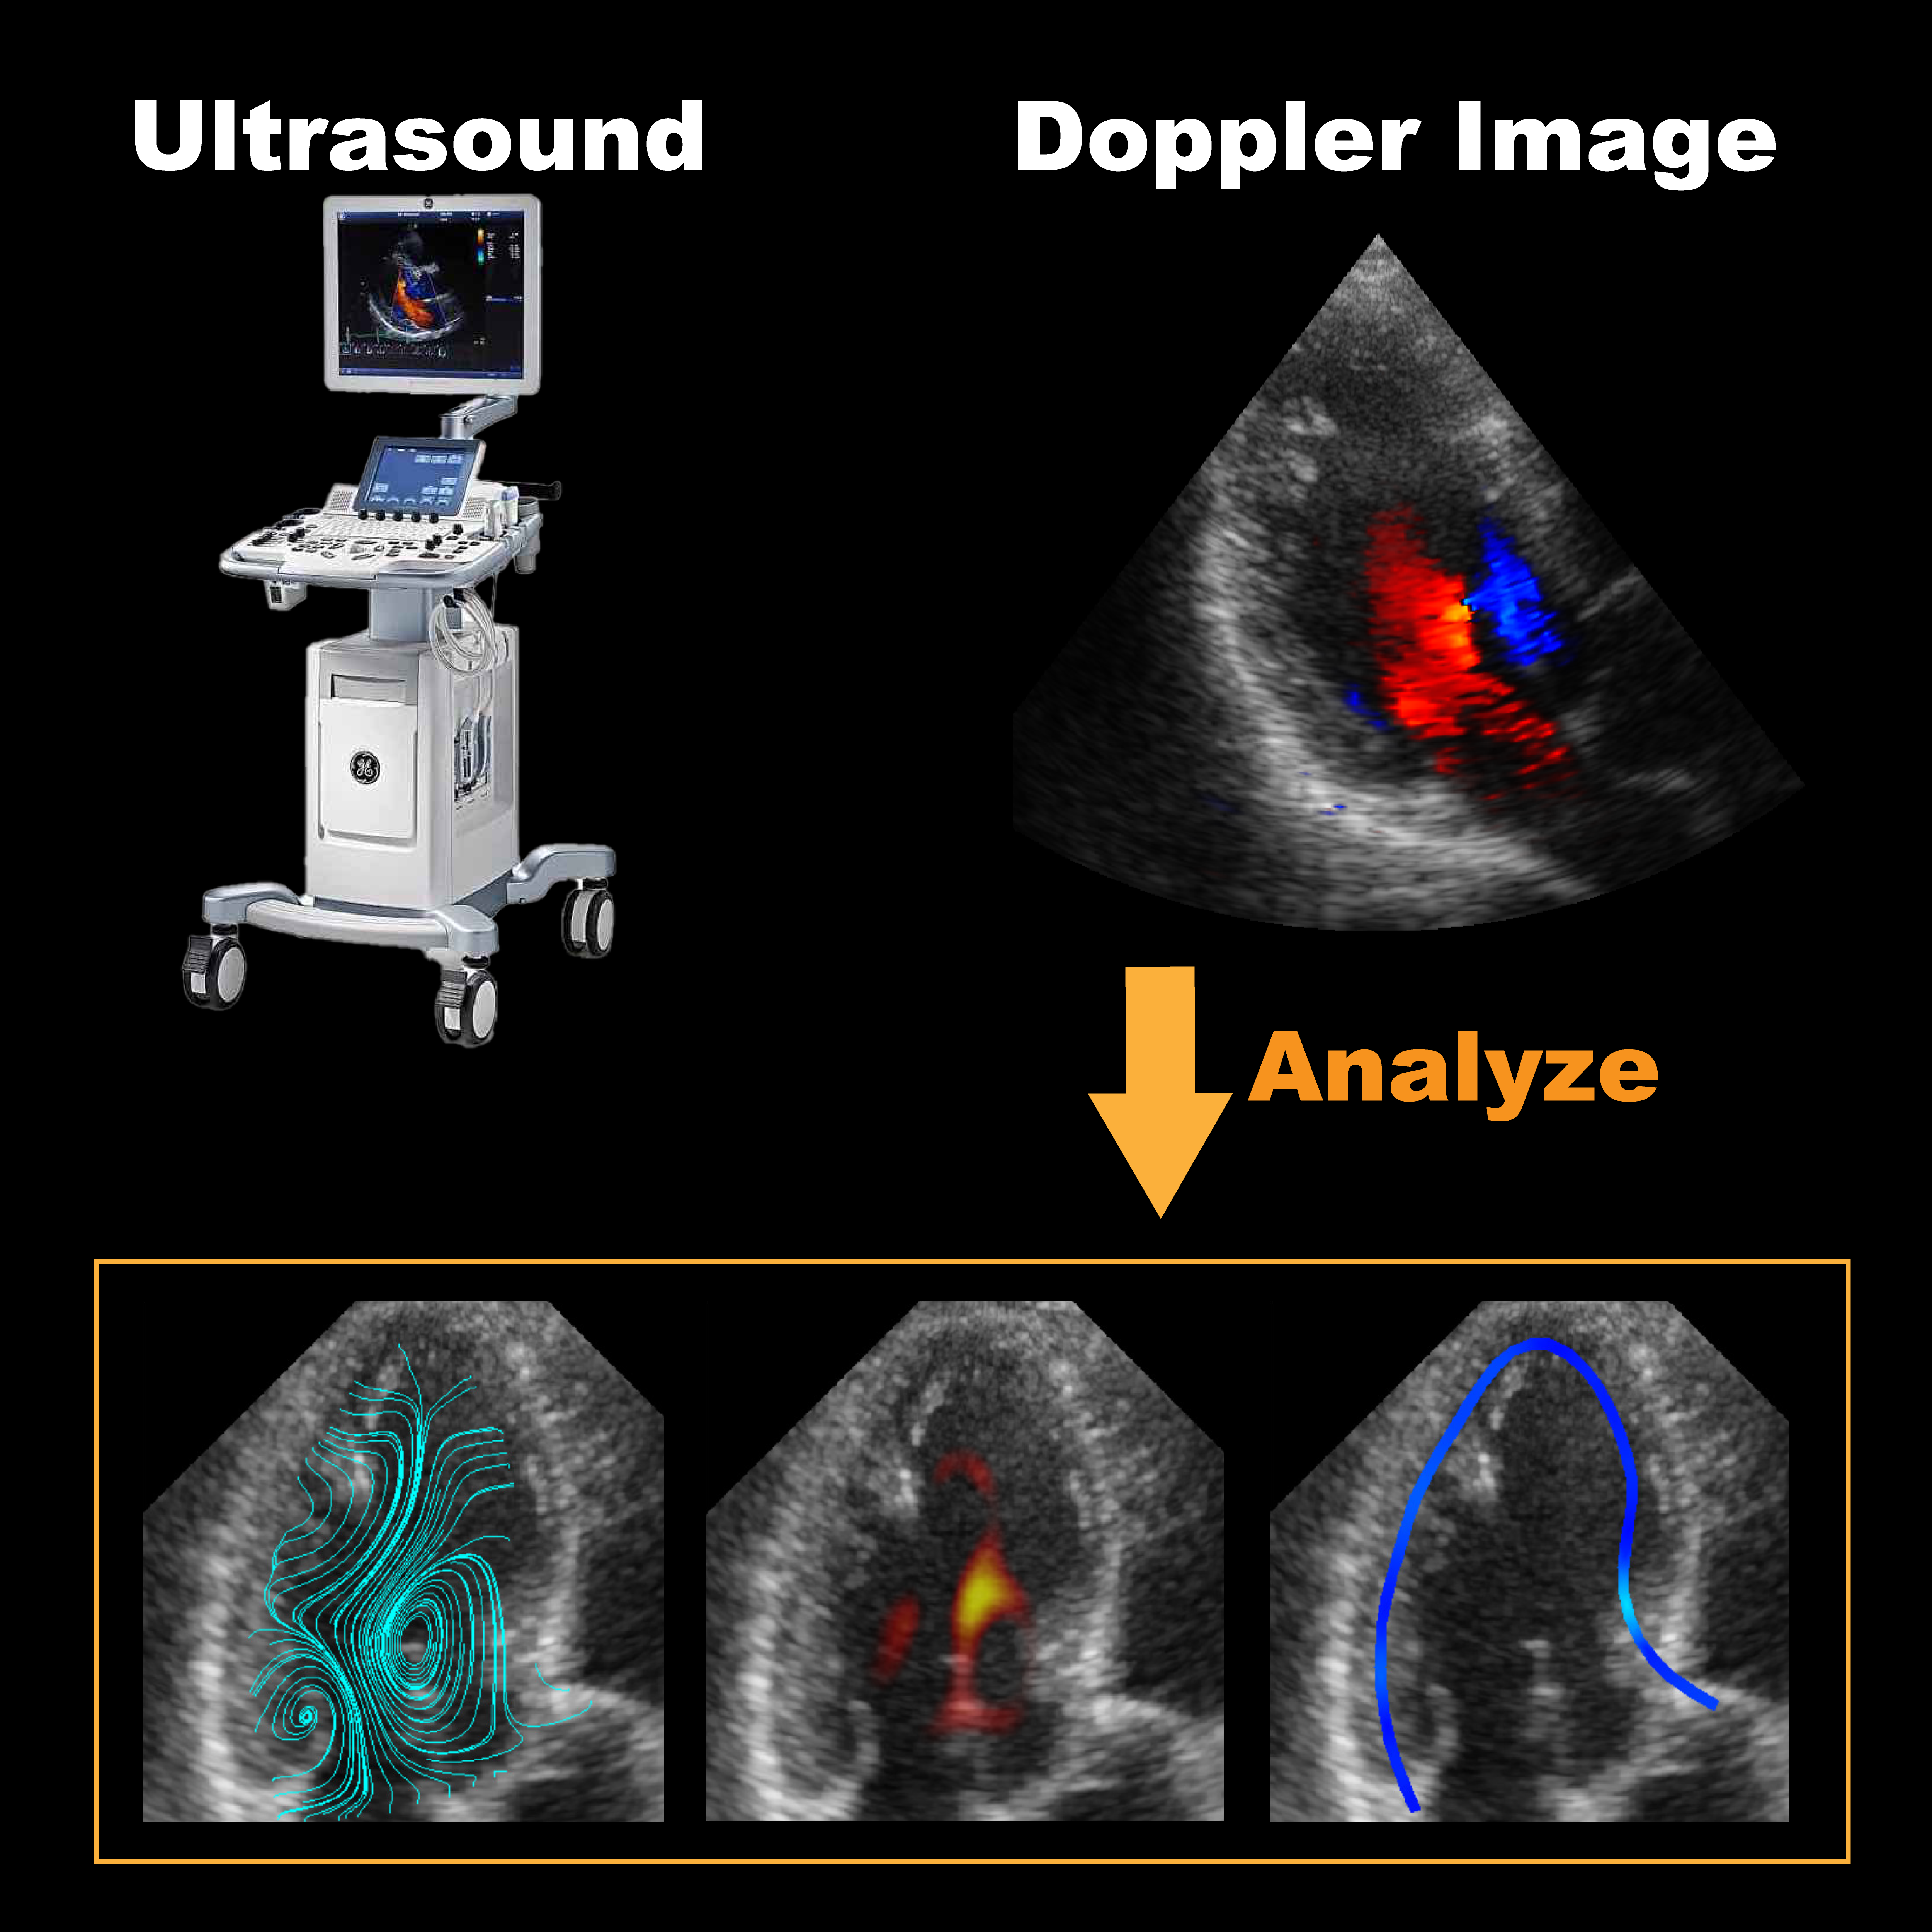 Visualize blood flow from a single image of echocardiography